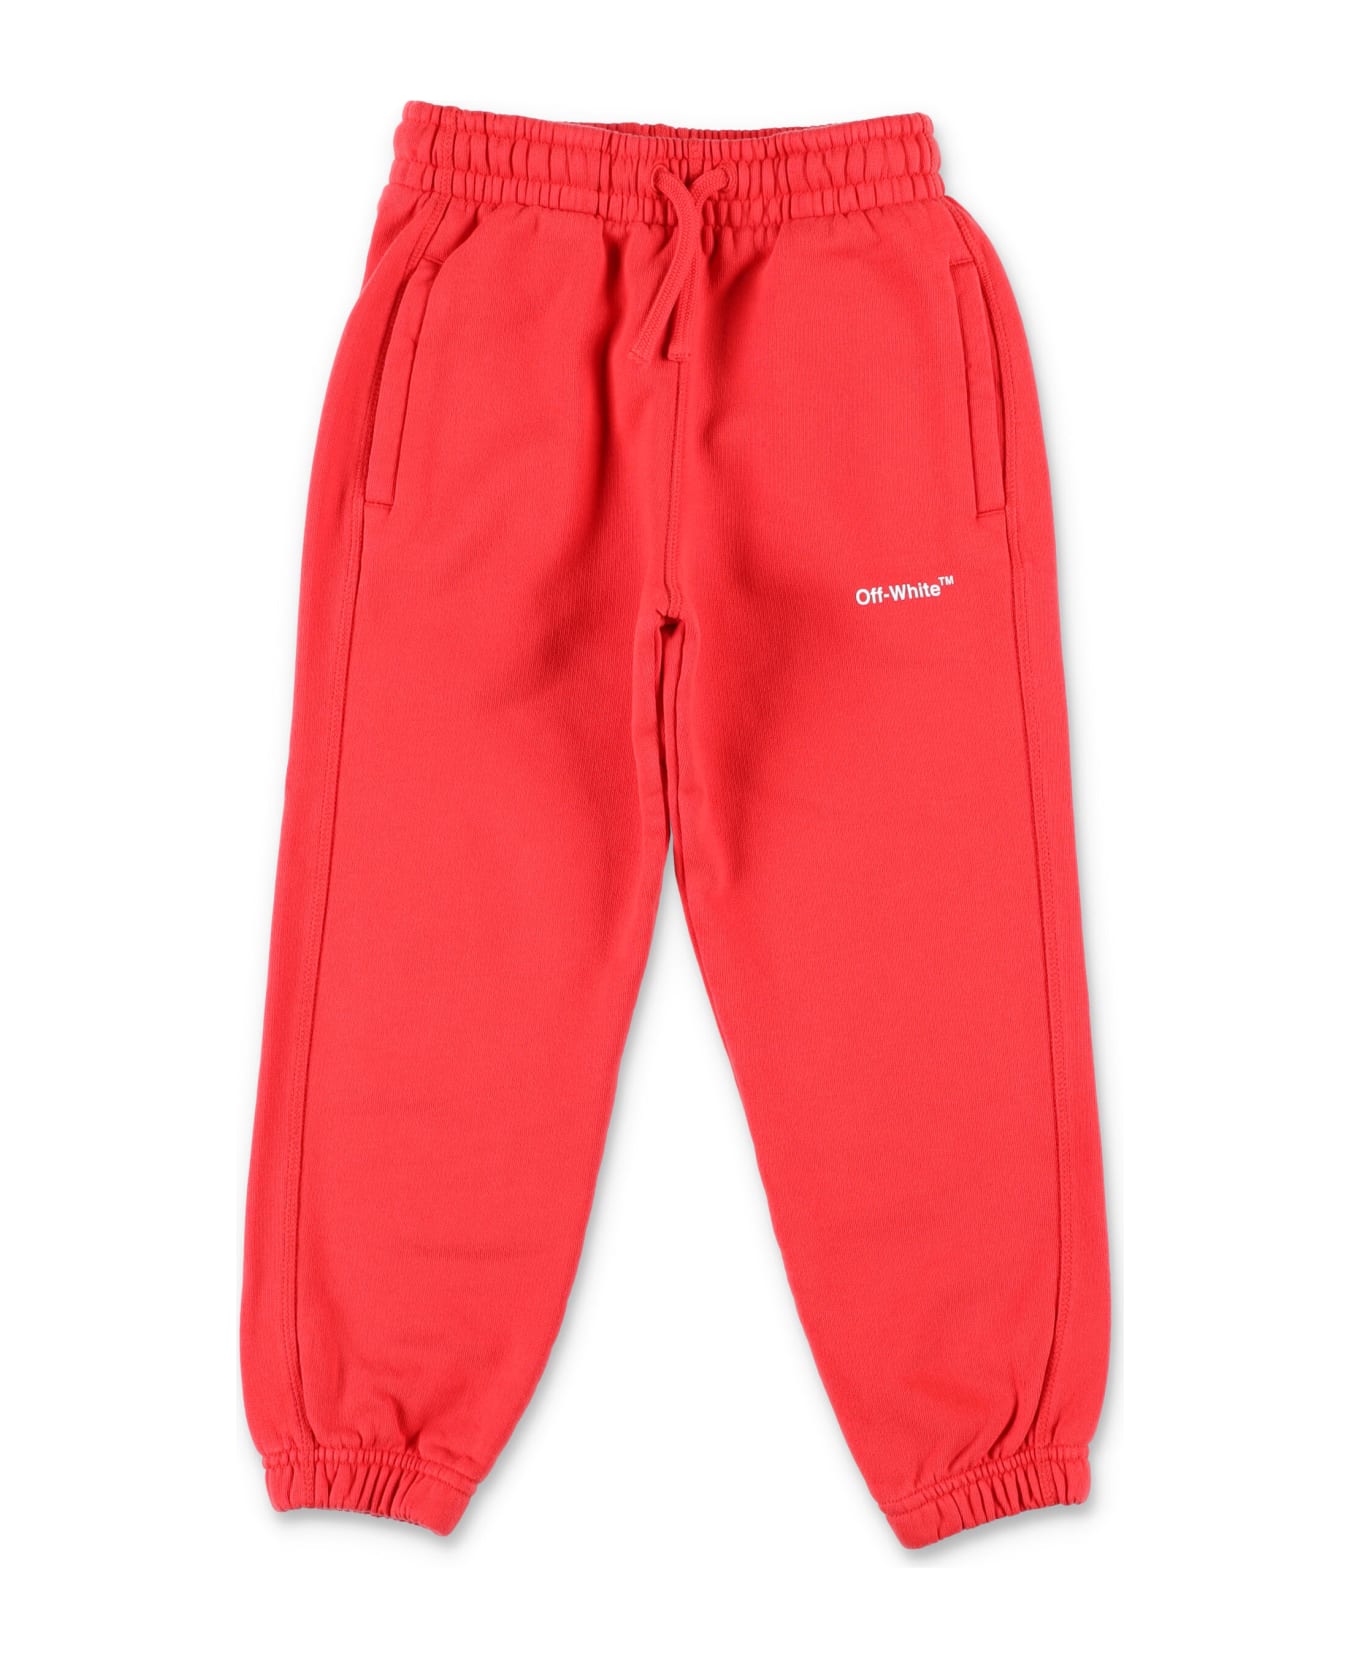 Off-White Rubber Arrow Sweat Pants - RED WHITE